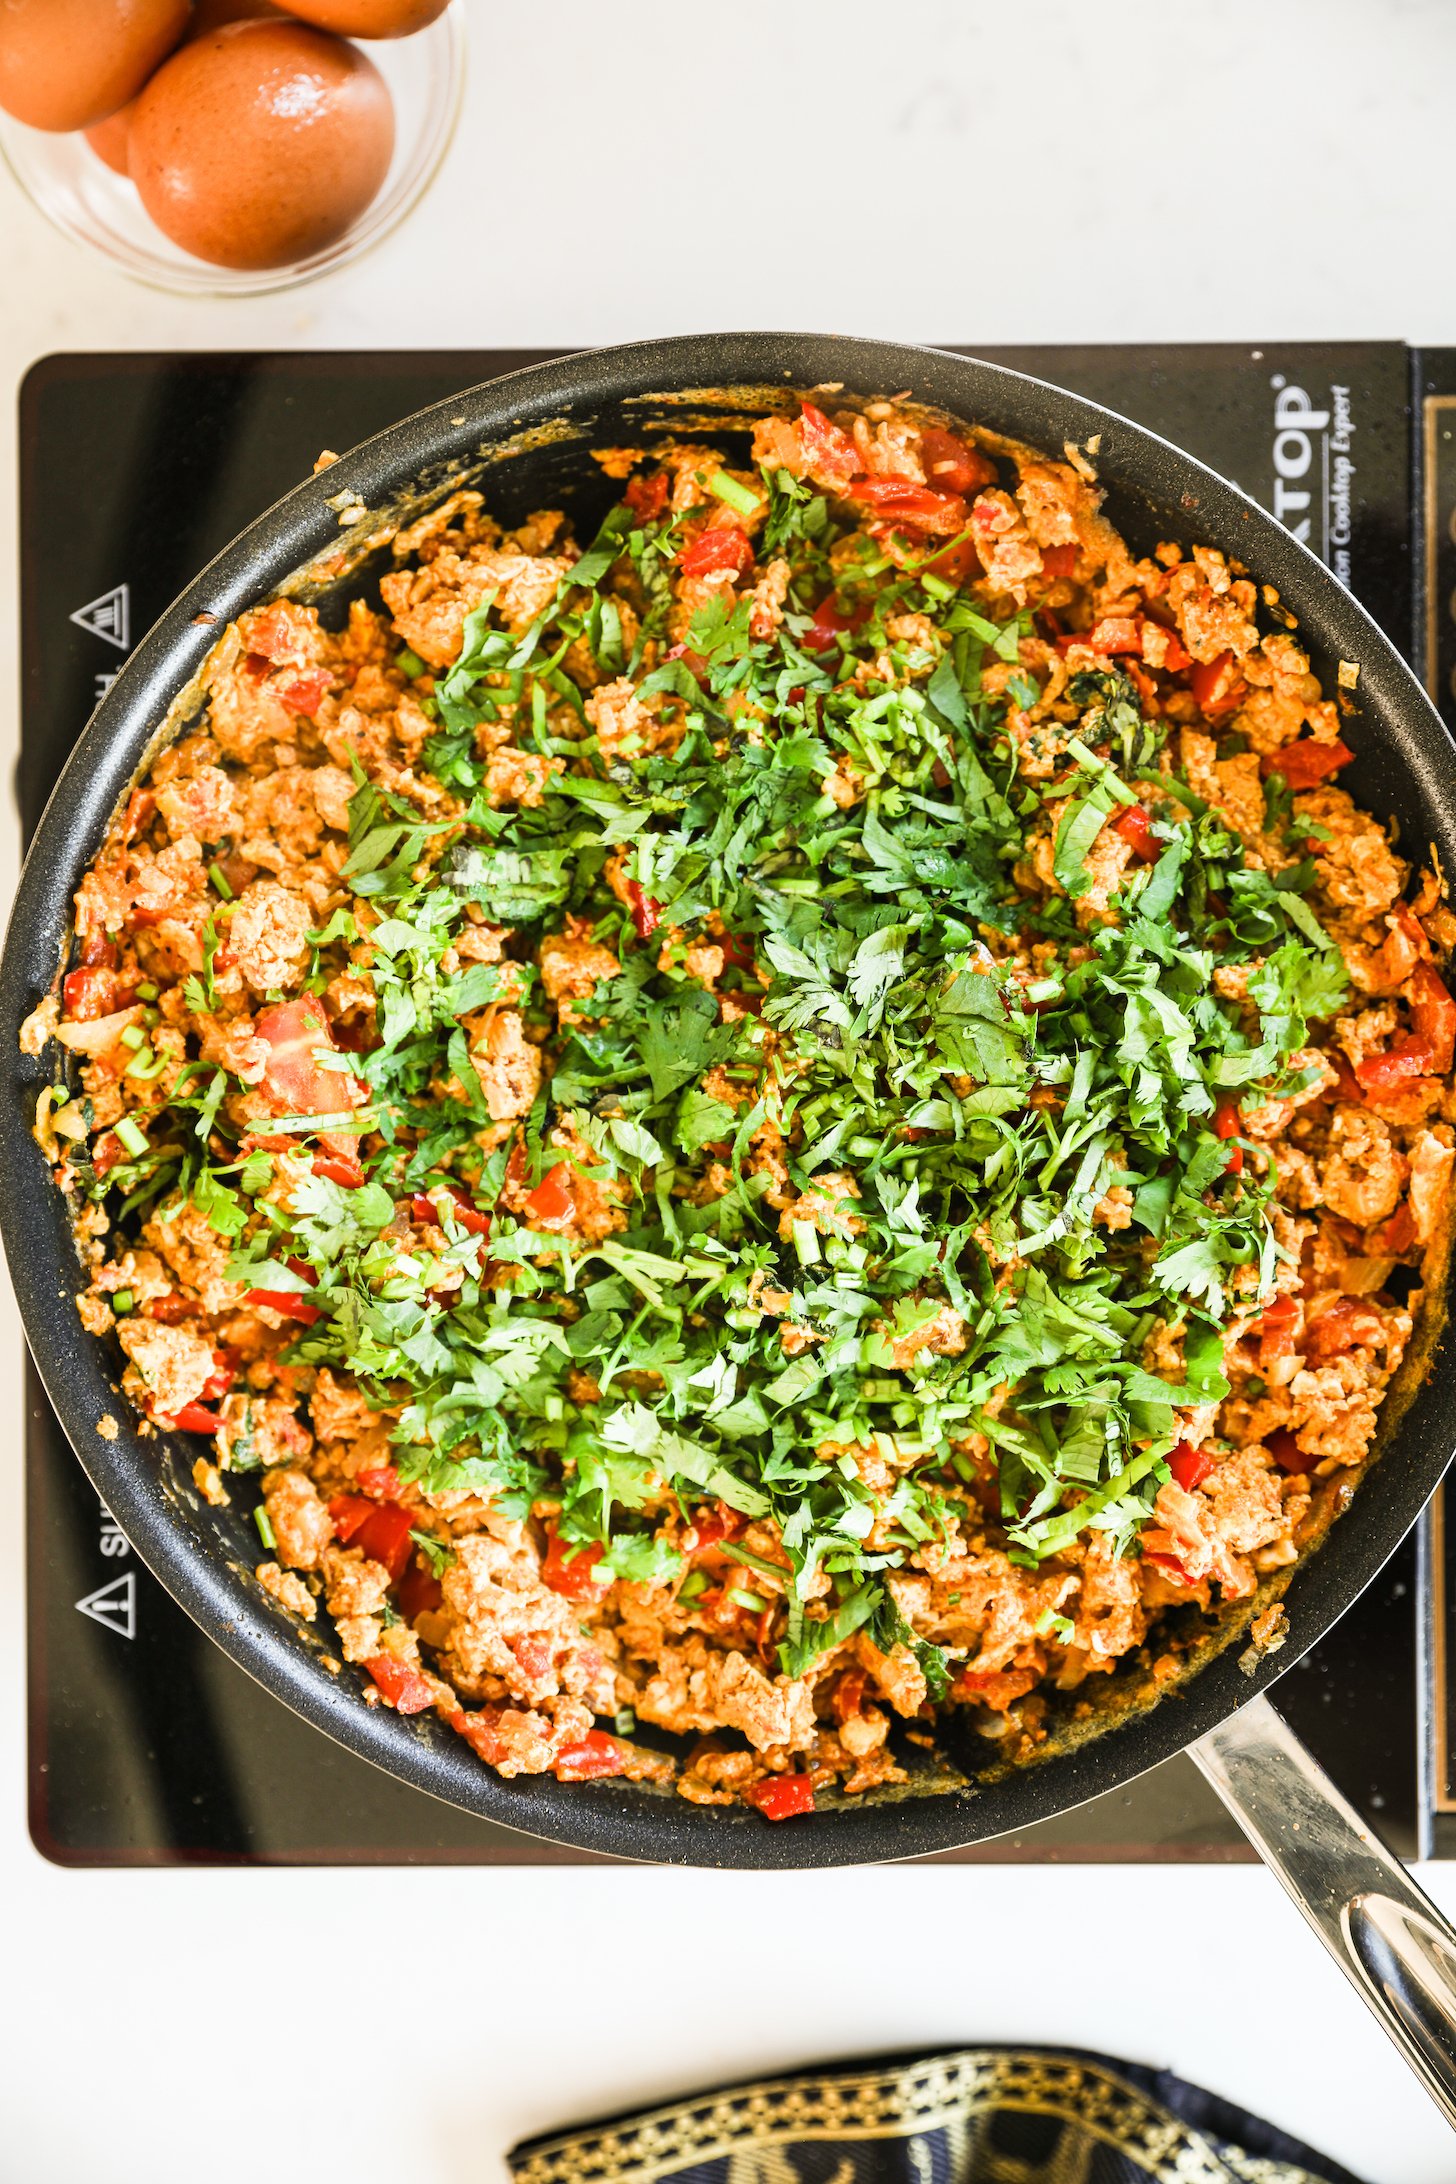 Image of a pan on a portable stove containing scrambled eggs with vegetables inside, garnished with chopped cilantro.